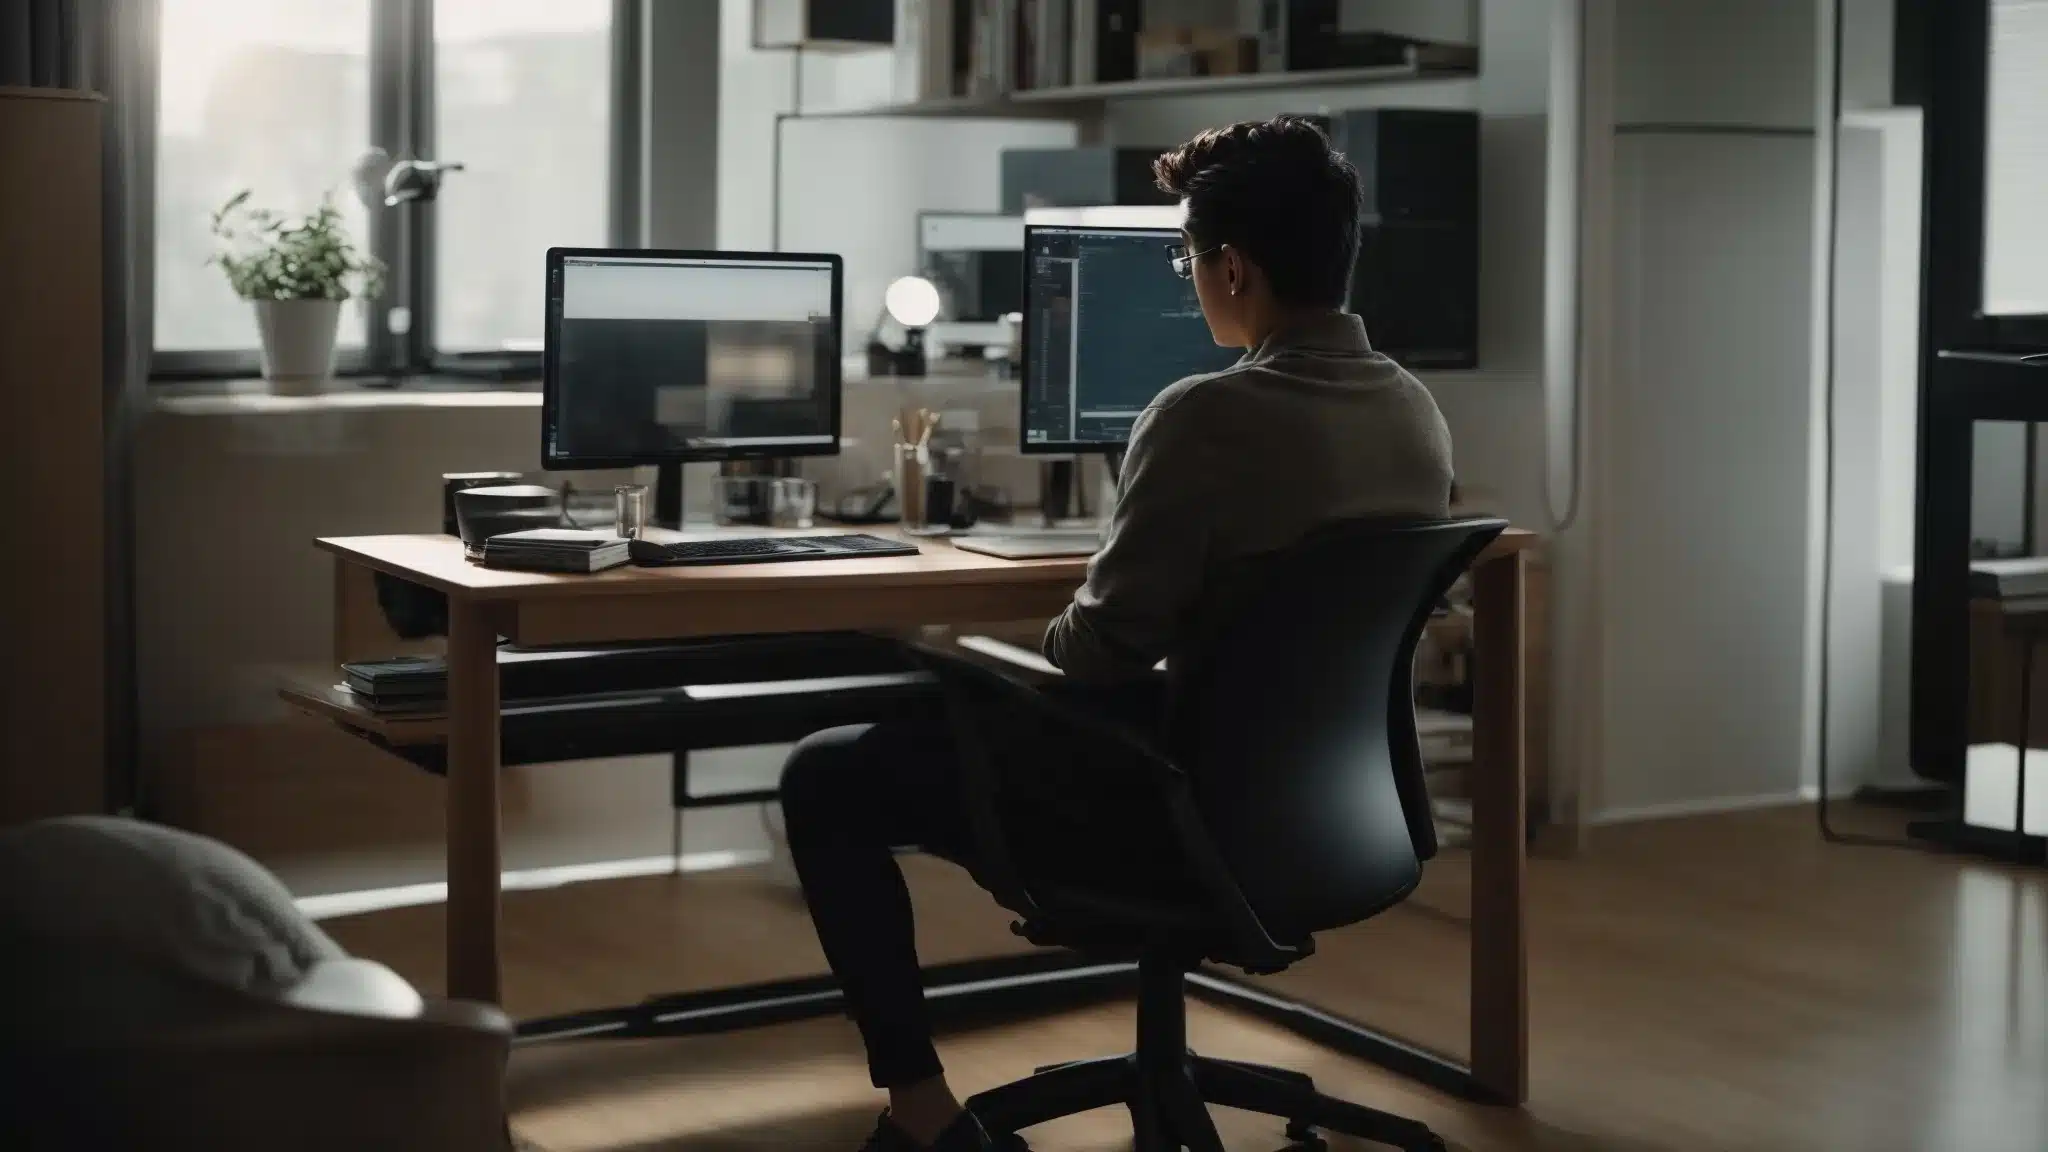 A Person Sits At A Spacious Desk With A Computer Monitor At Eye Level, A Supportive Chair, And Ample Room For Movement.